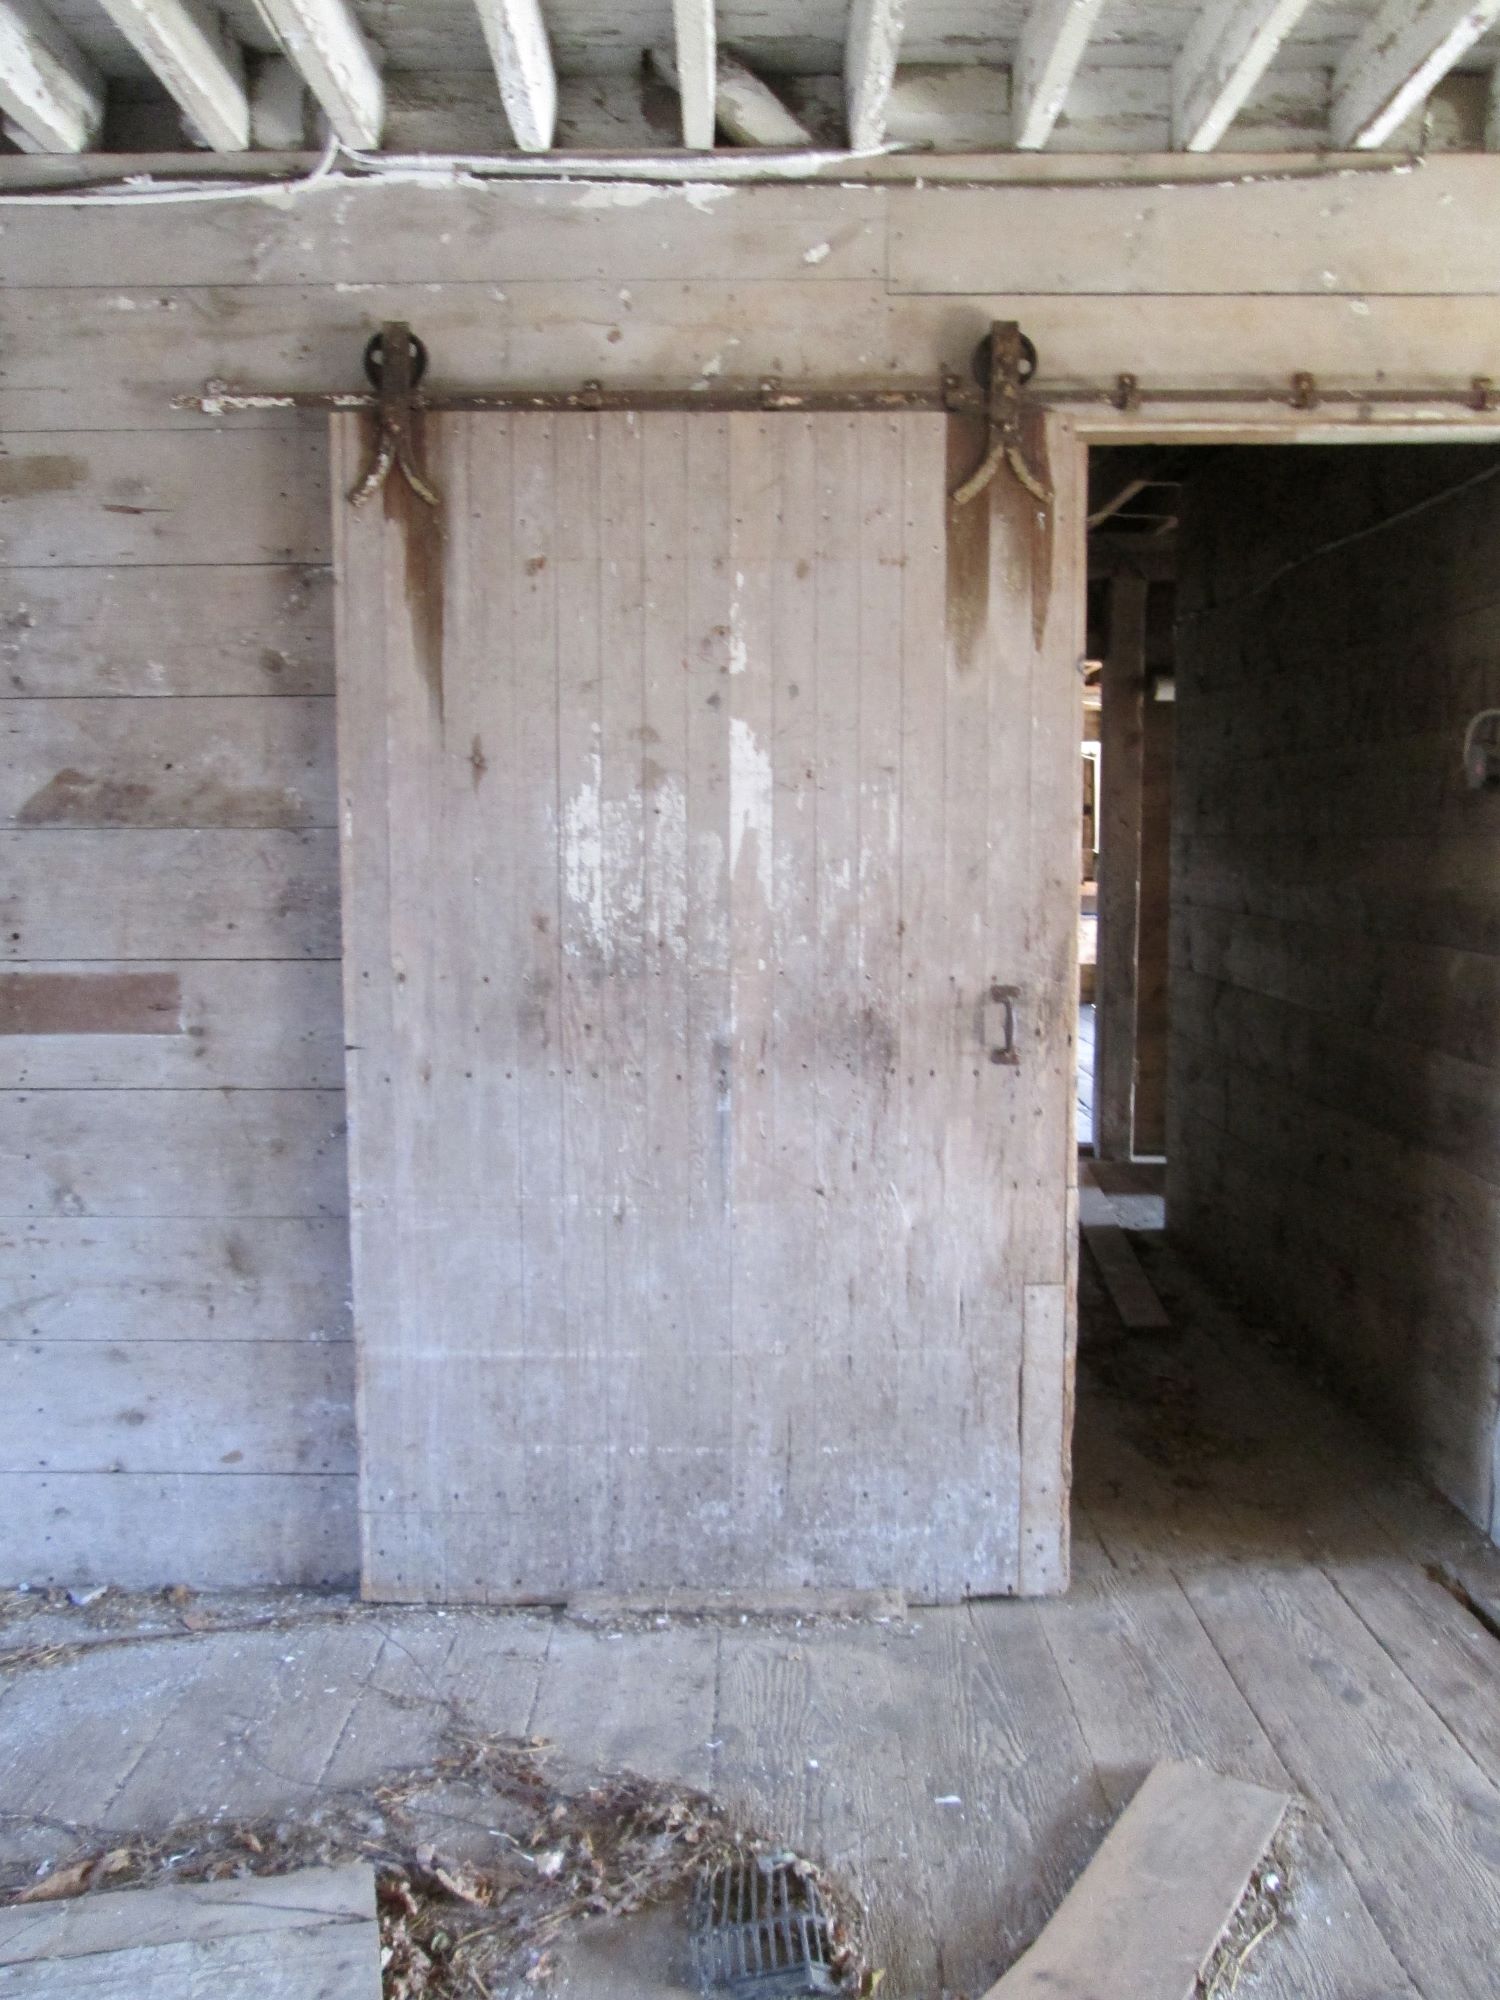 A sliding door from a dairy barn